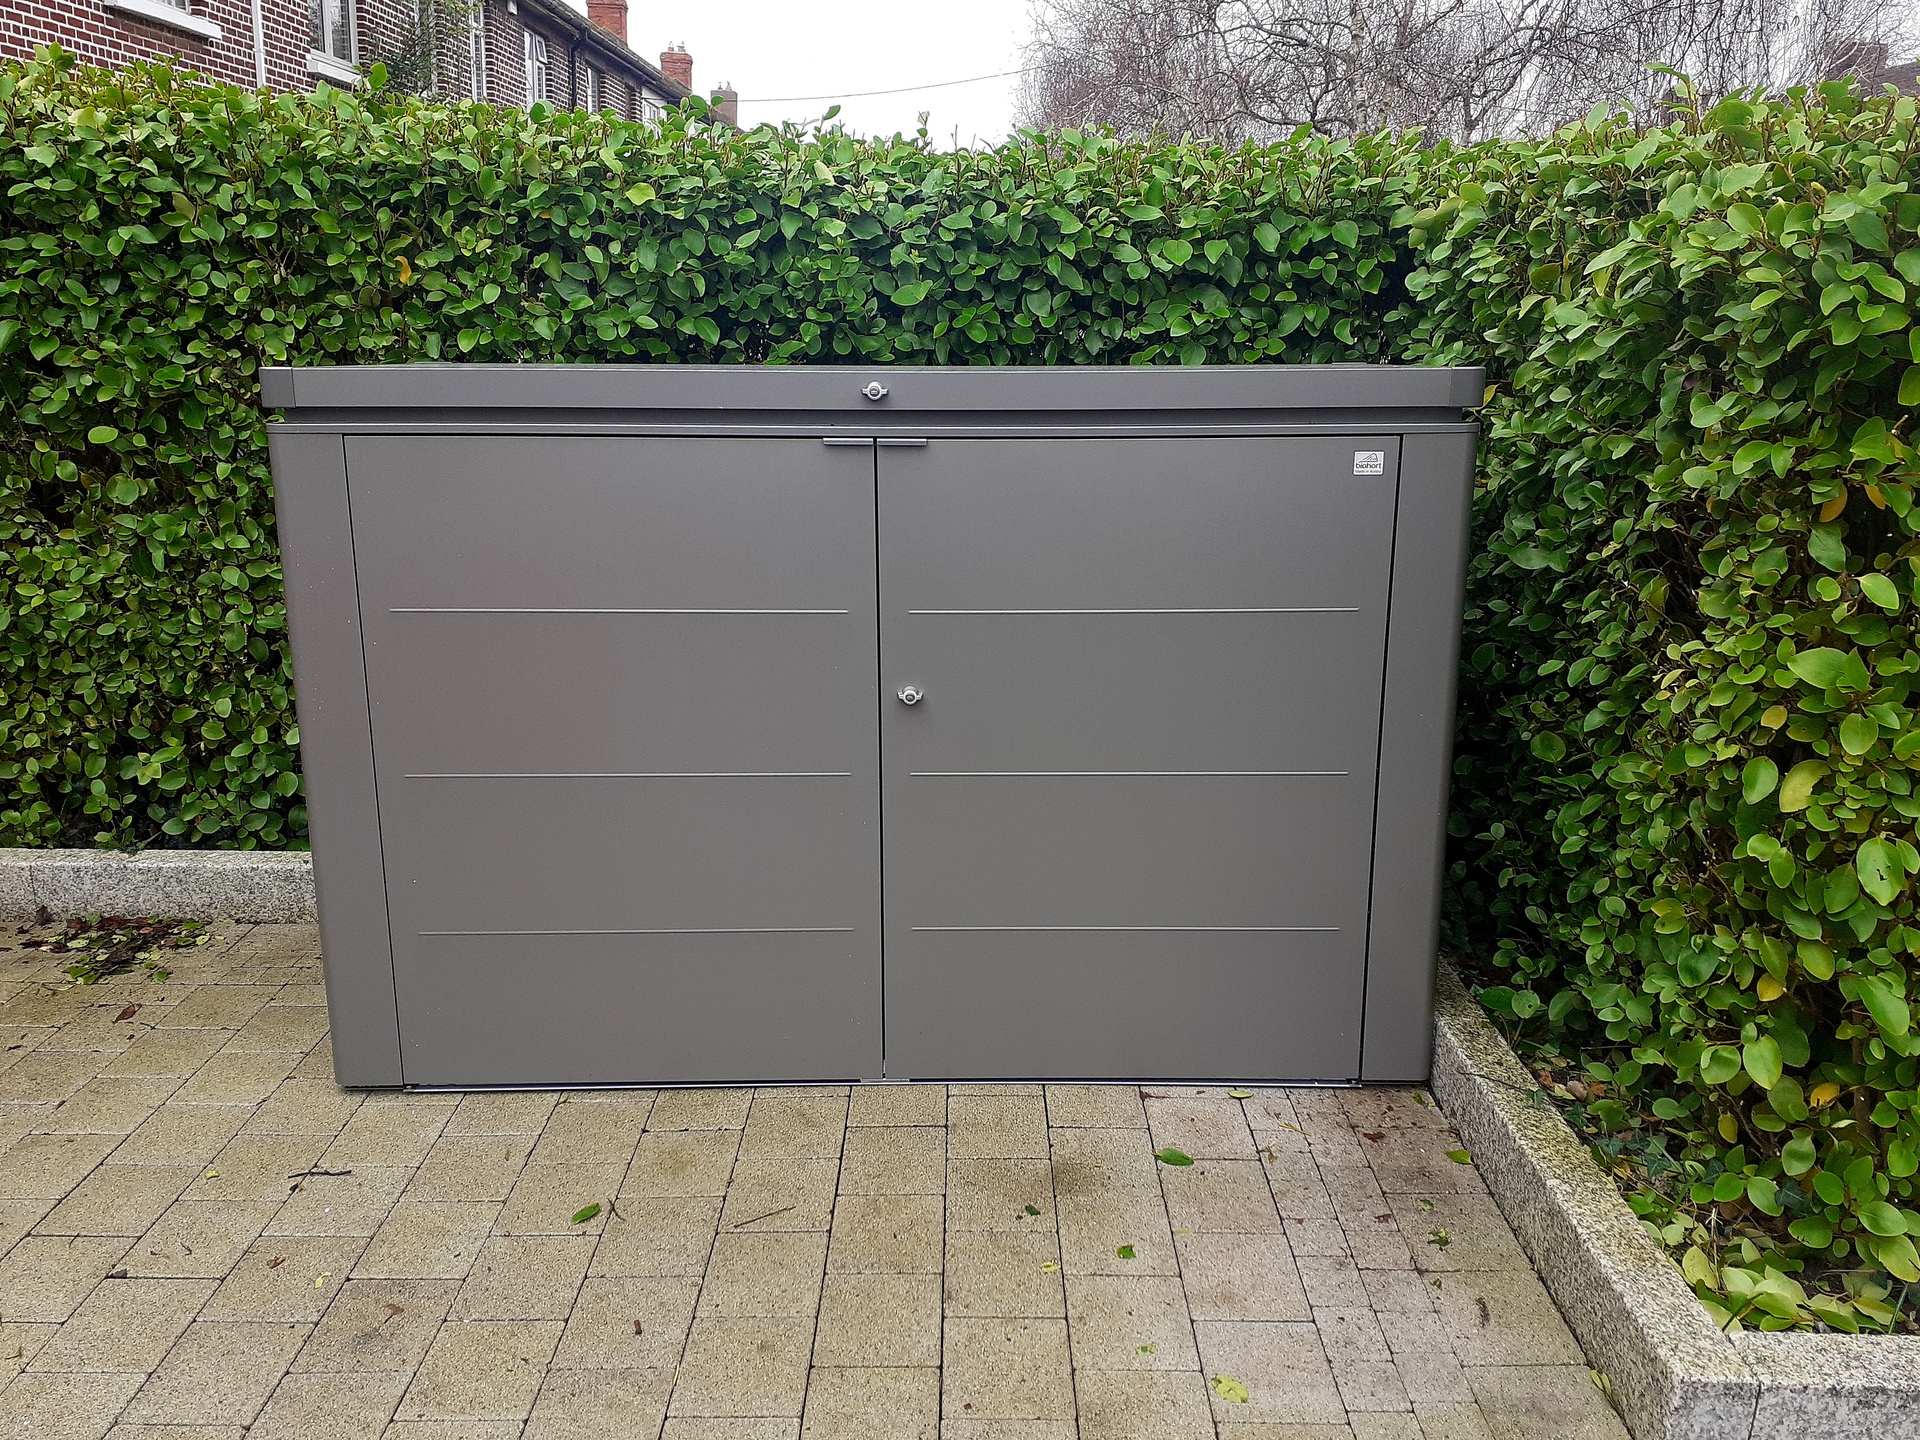 Biohort HighBoard 200 Bike Storage Unit - a stylish & secure storage solution for Bikes  | Supplied + Fitted in Killester, Dublin 5 by Owen Chubb Landscapers.